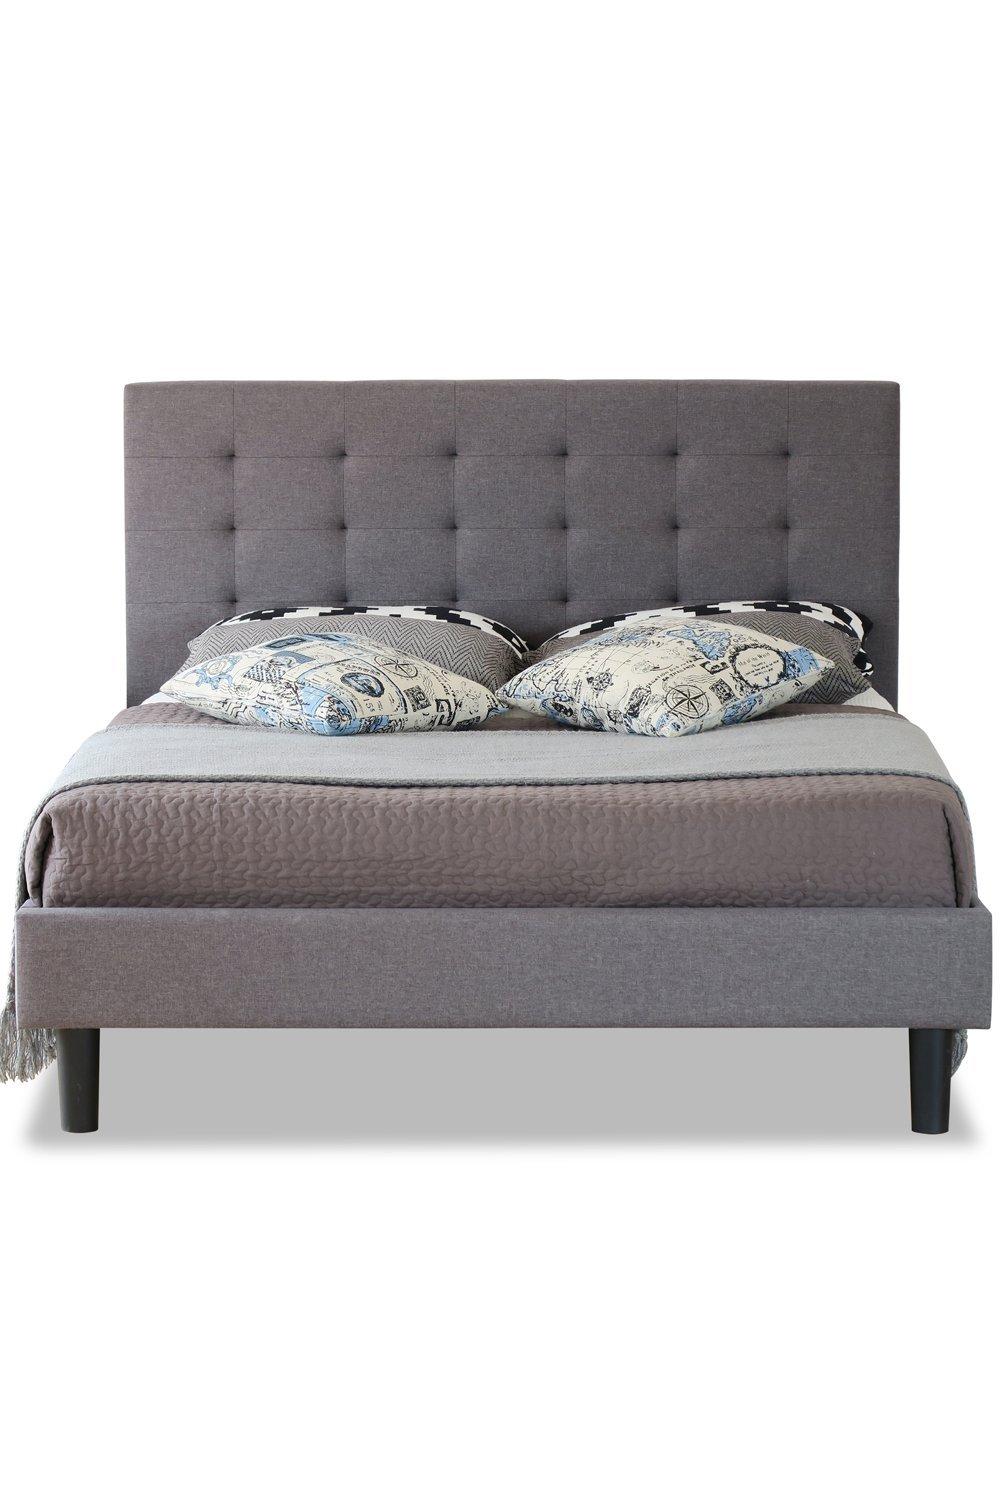 Fabric Bed with High Headboard, Slatted Wooden Sprung Bed Base